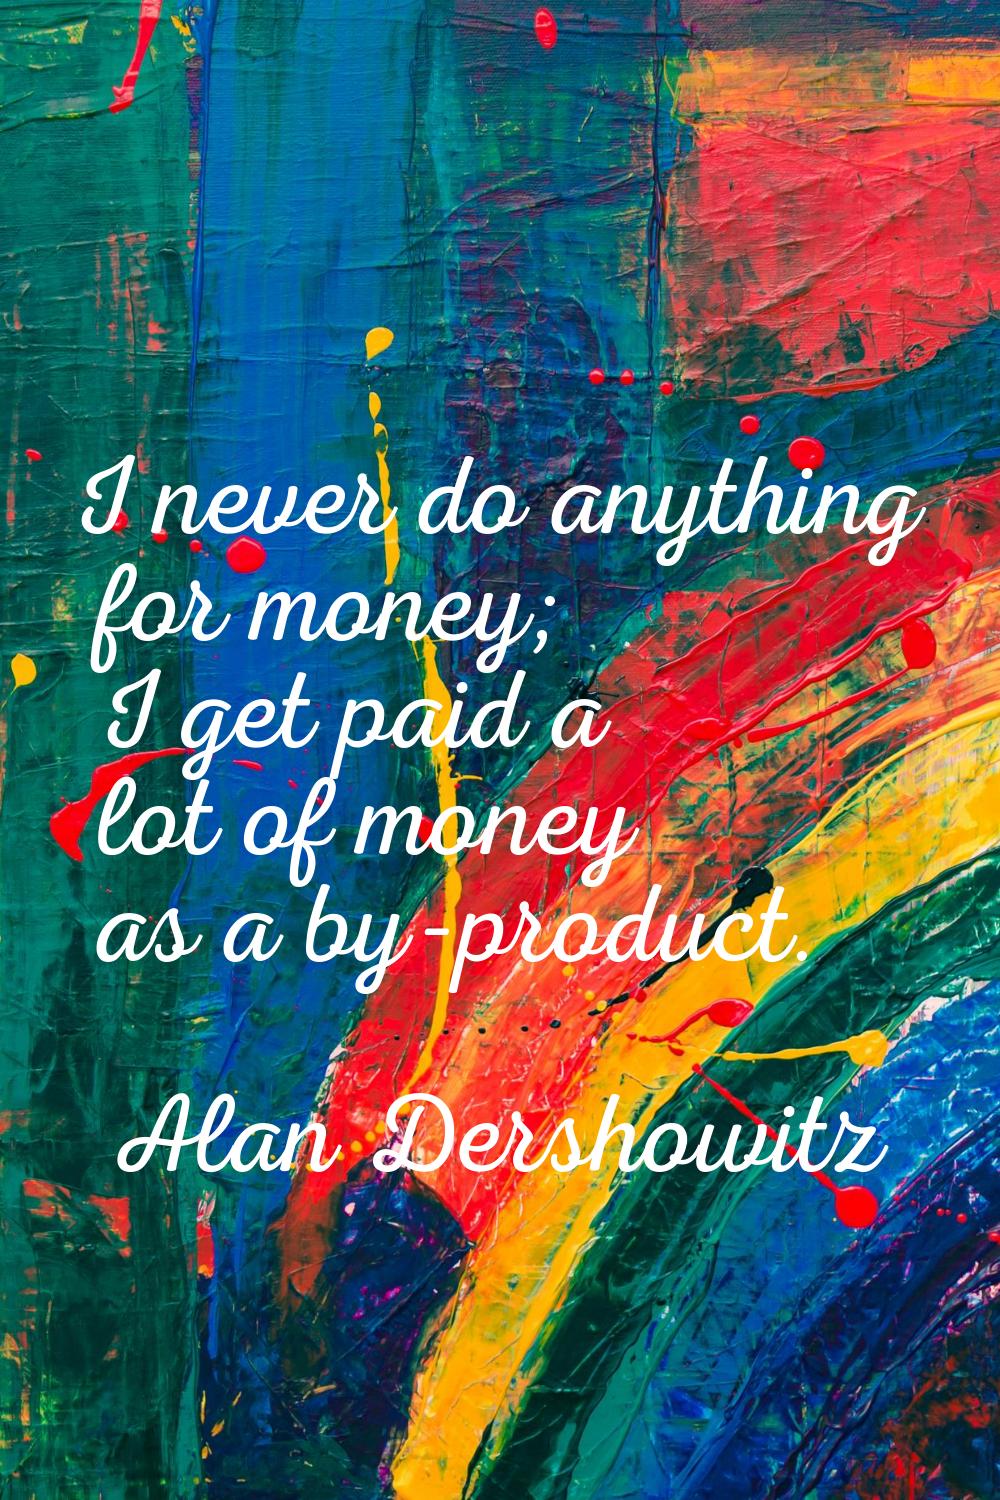 I never do anything for money; I get paid a lot of money as a by-product.